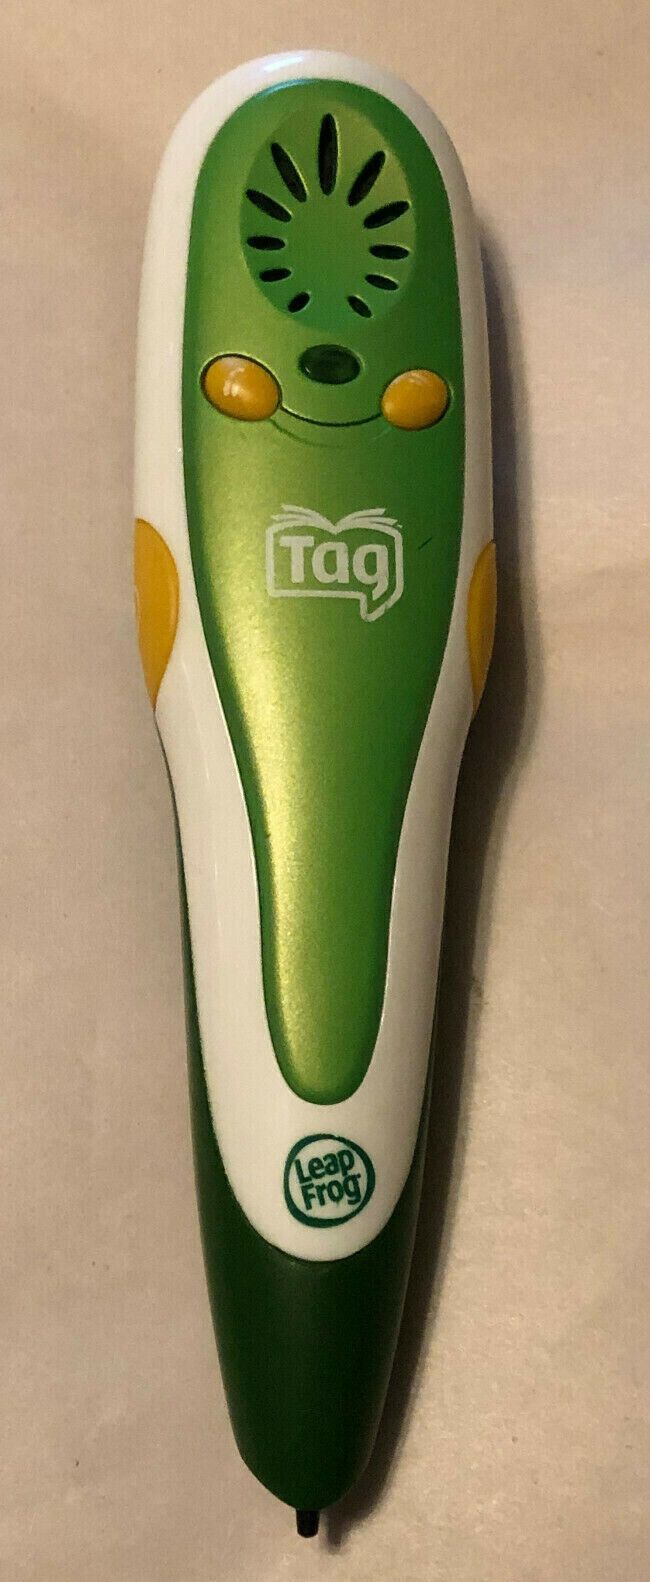 LeapFrog Tag Replacement Pen Stylus Only - Green - *Works Great* 